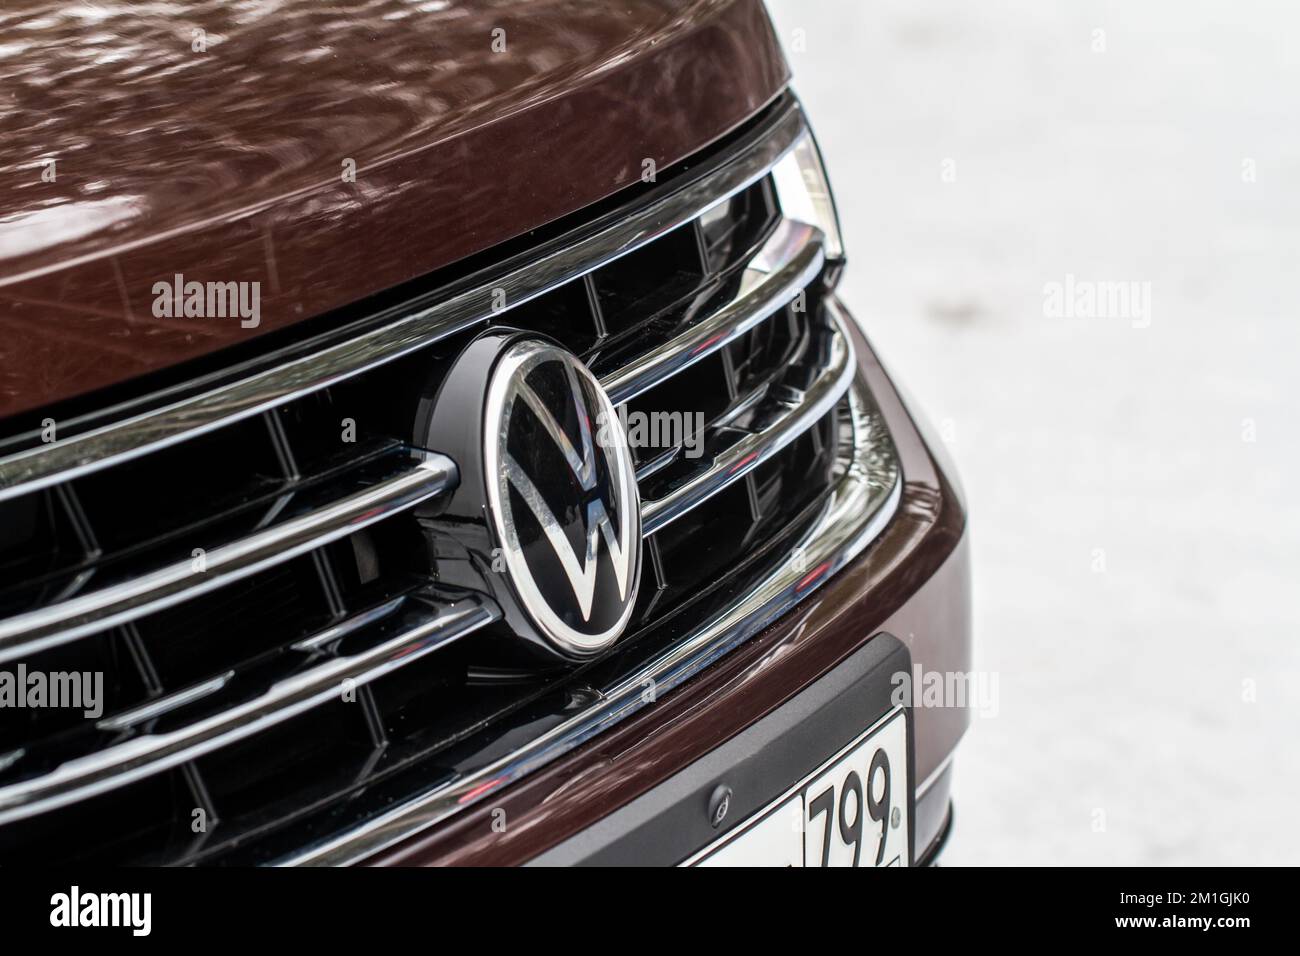 MOSCOW, RUSSIA - JANUARY 22, 2022. Volkswagen Tiguan (AD1) subcompact luxury SUV car, front-side view. Volkswagen Group close-up logo. Stock Photo